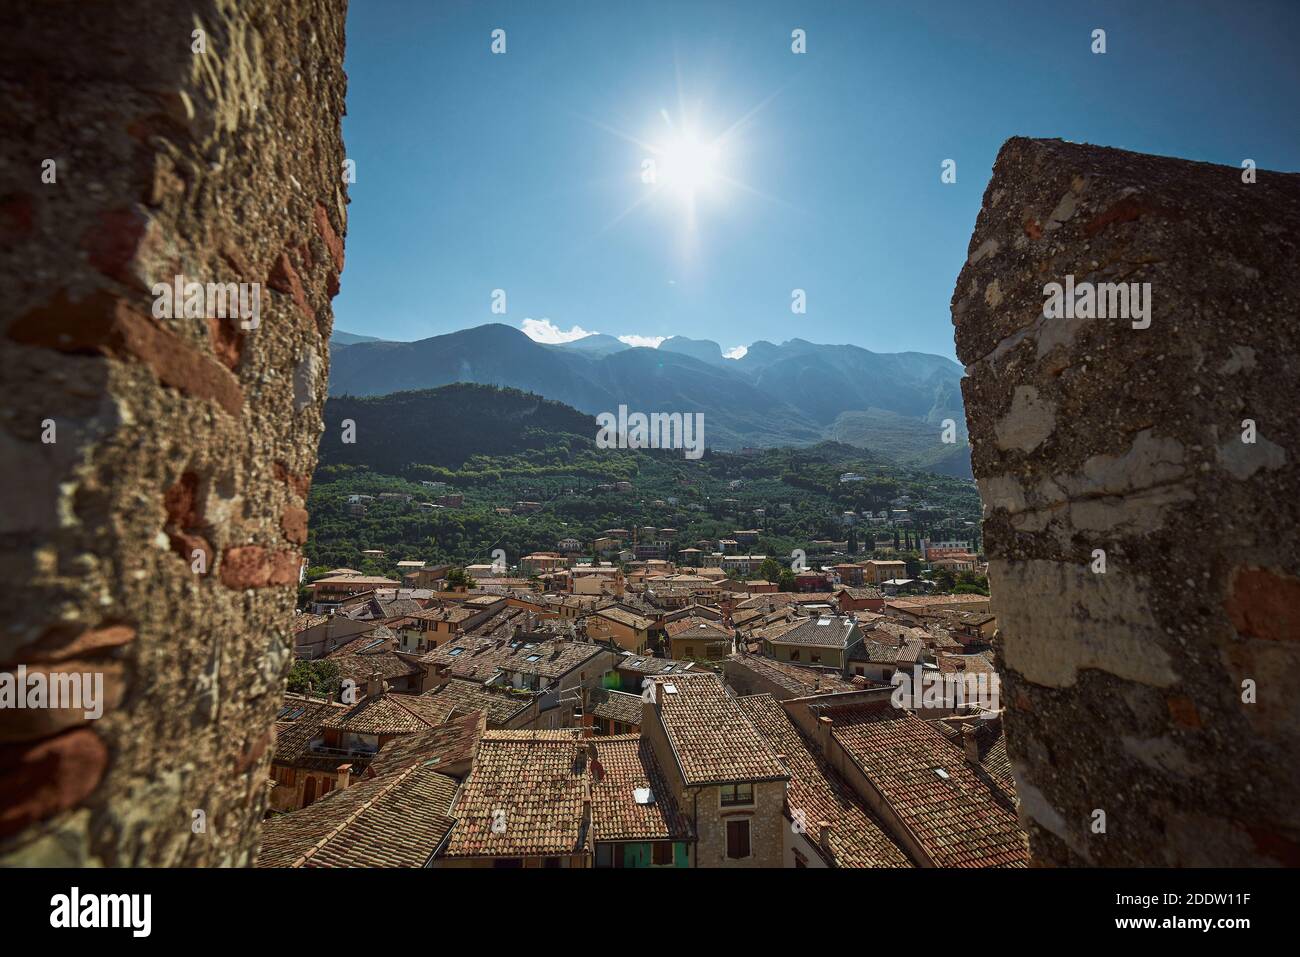 View from Castels walls on the mount and the village. Panoramic view Stock Photo